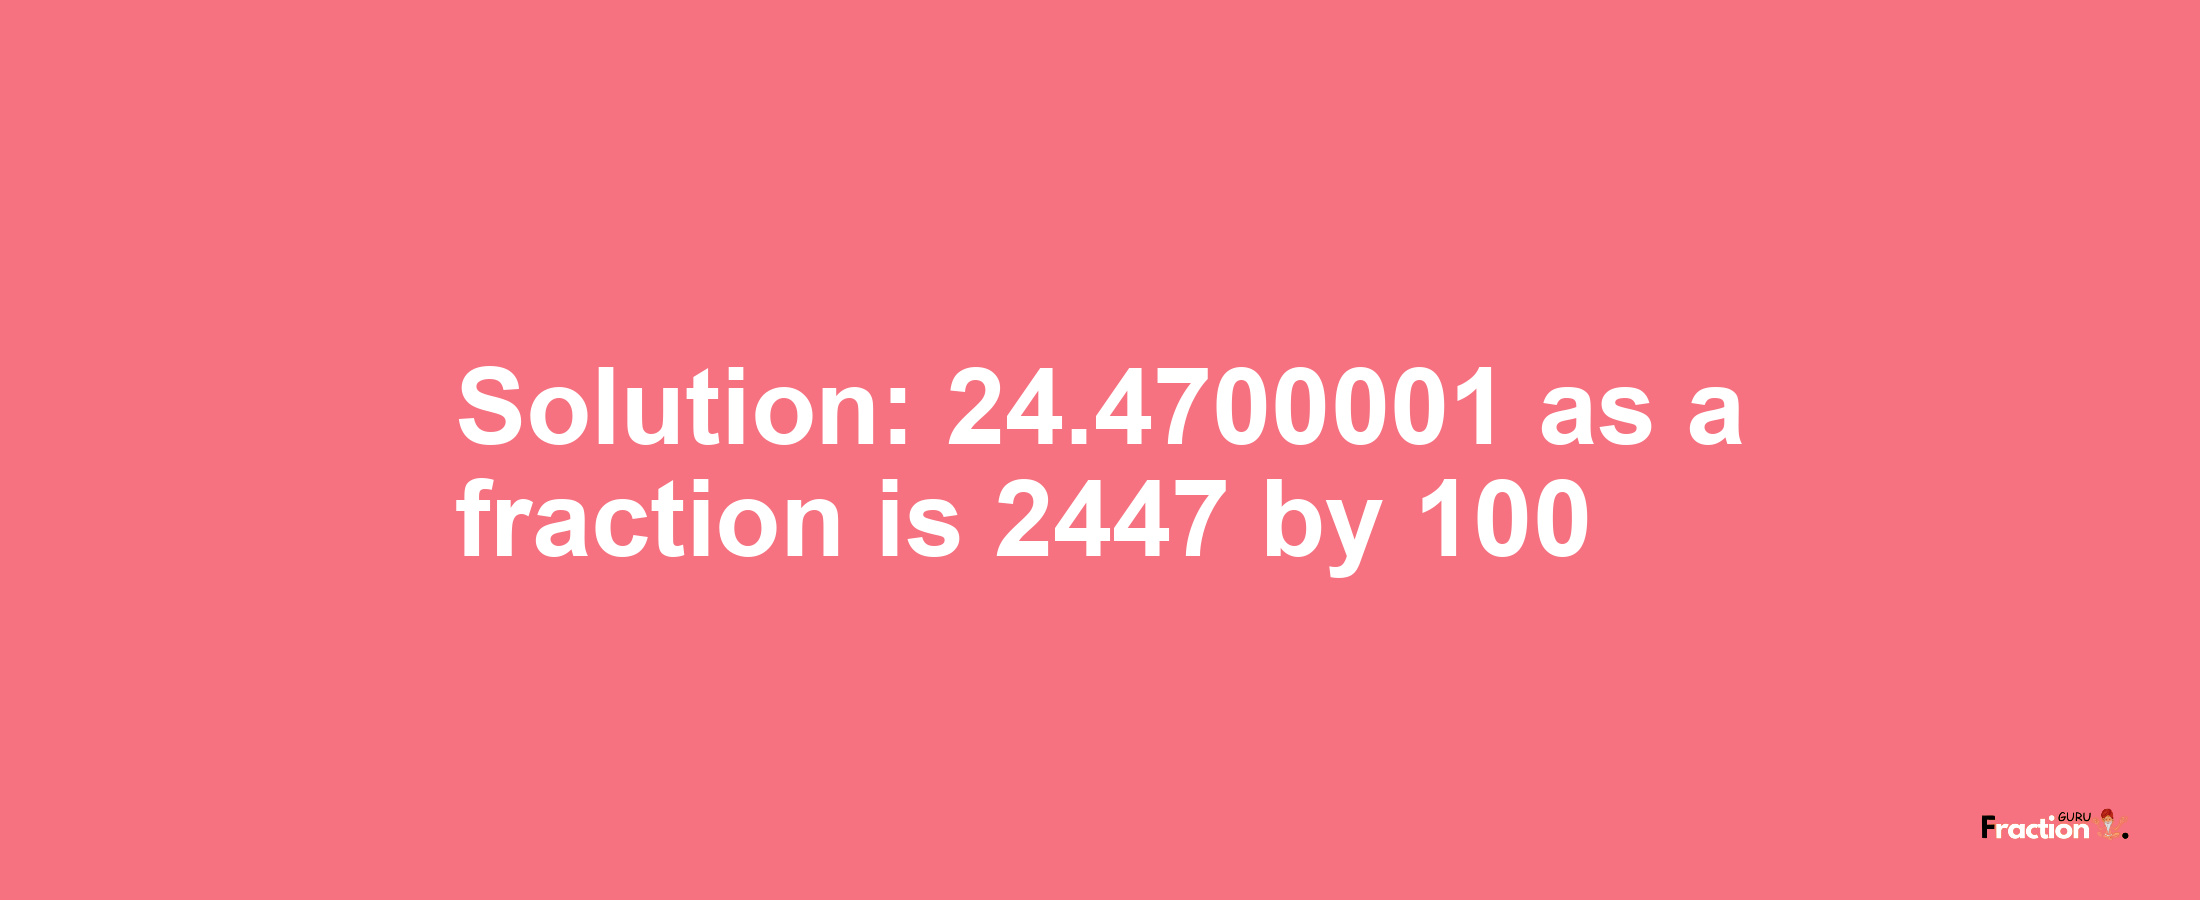 Solution:24.4700001 as a fraction is 2447/100